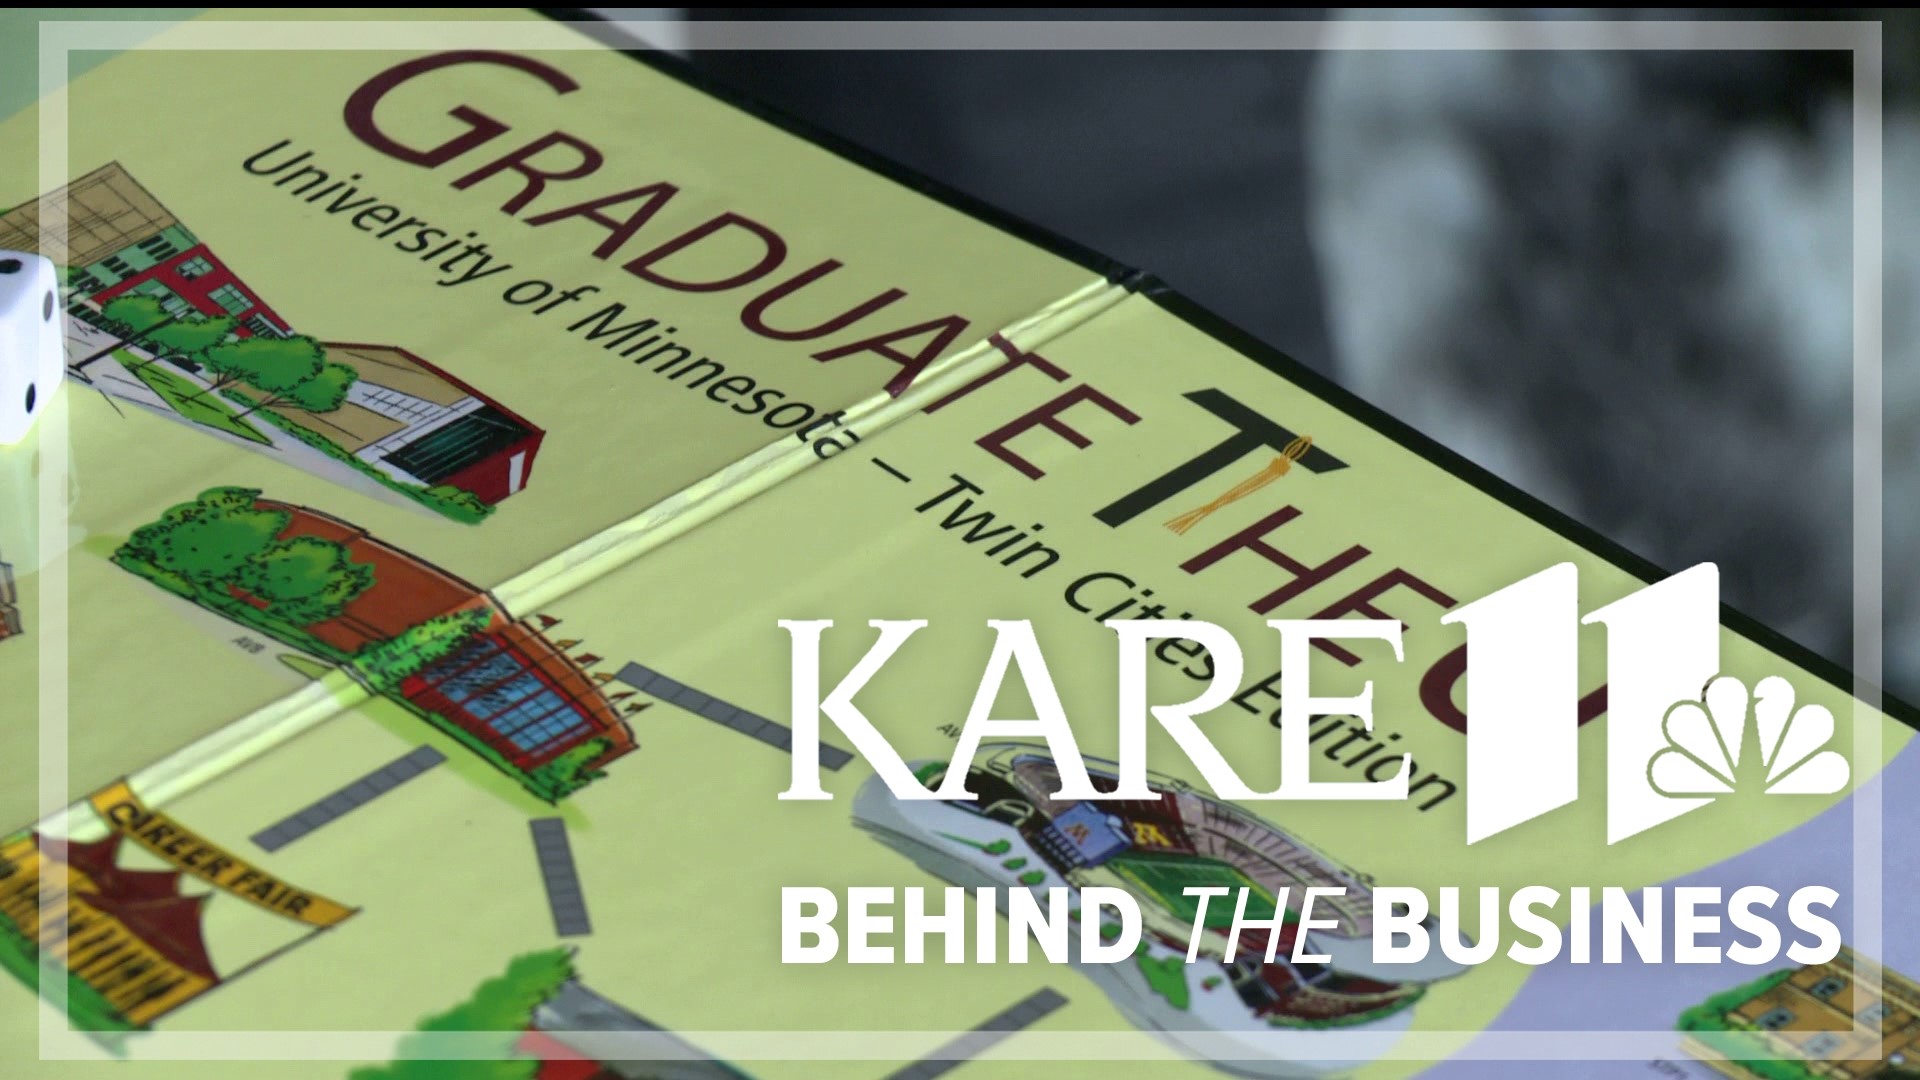 “GraduateTheU,” a board game born out of the COVID pandemic by Woodbury’s Sieffert family, aims to encapsulate campus life.